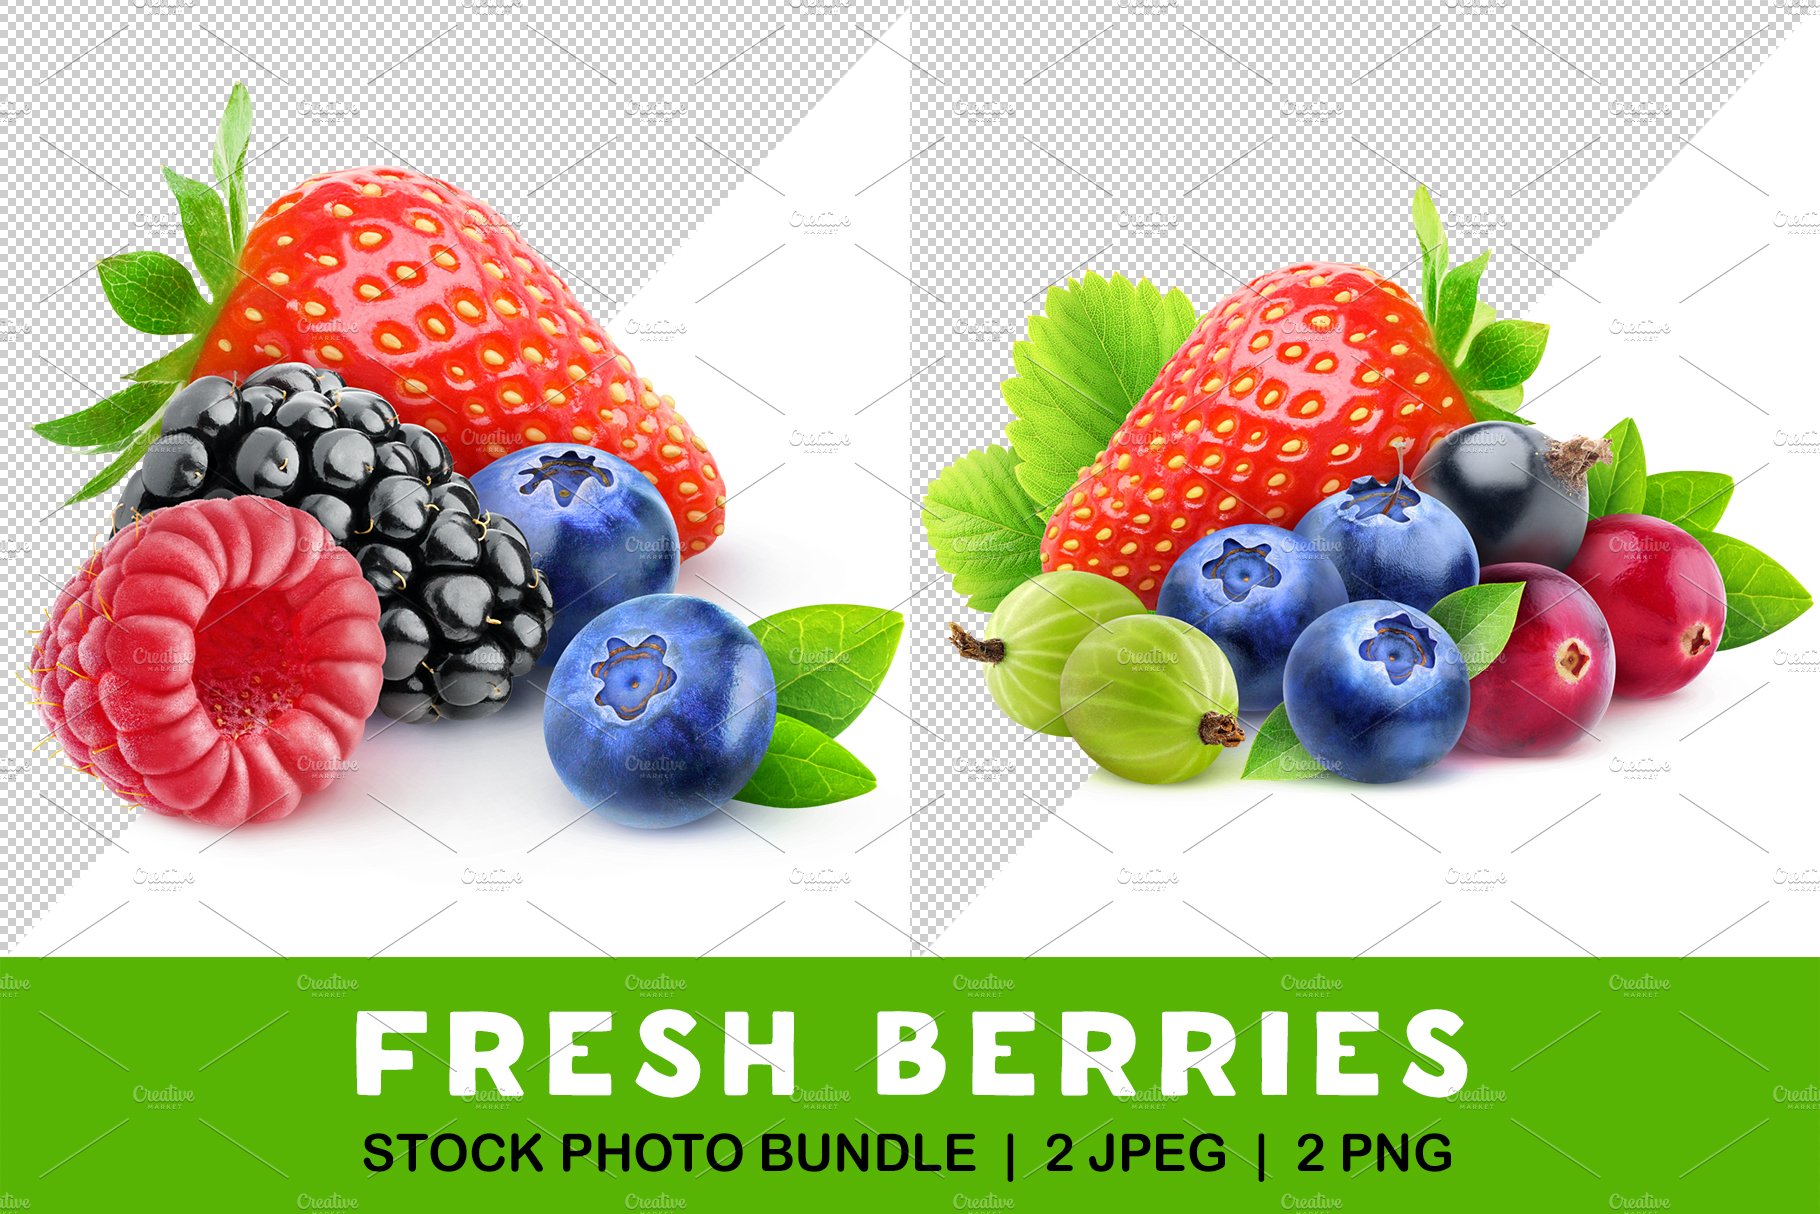 Isolated berries cover image.